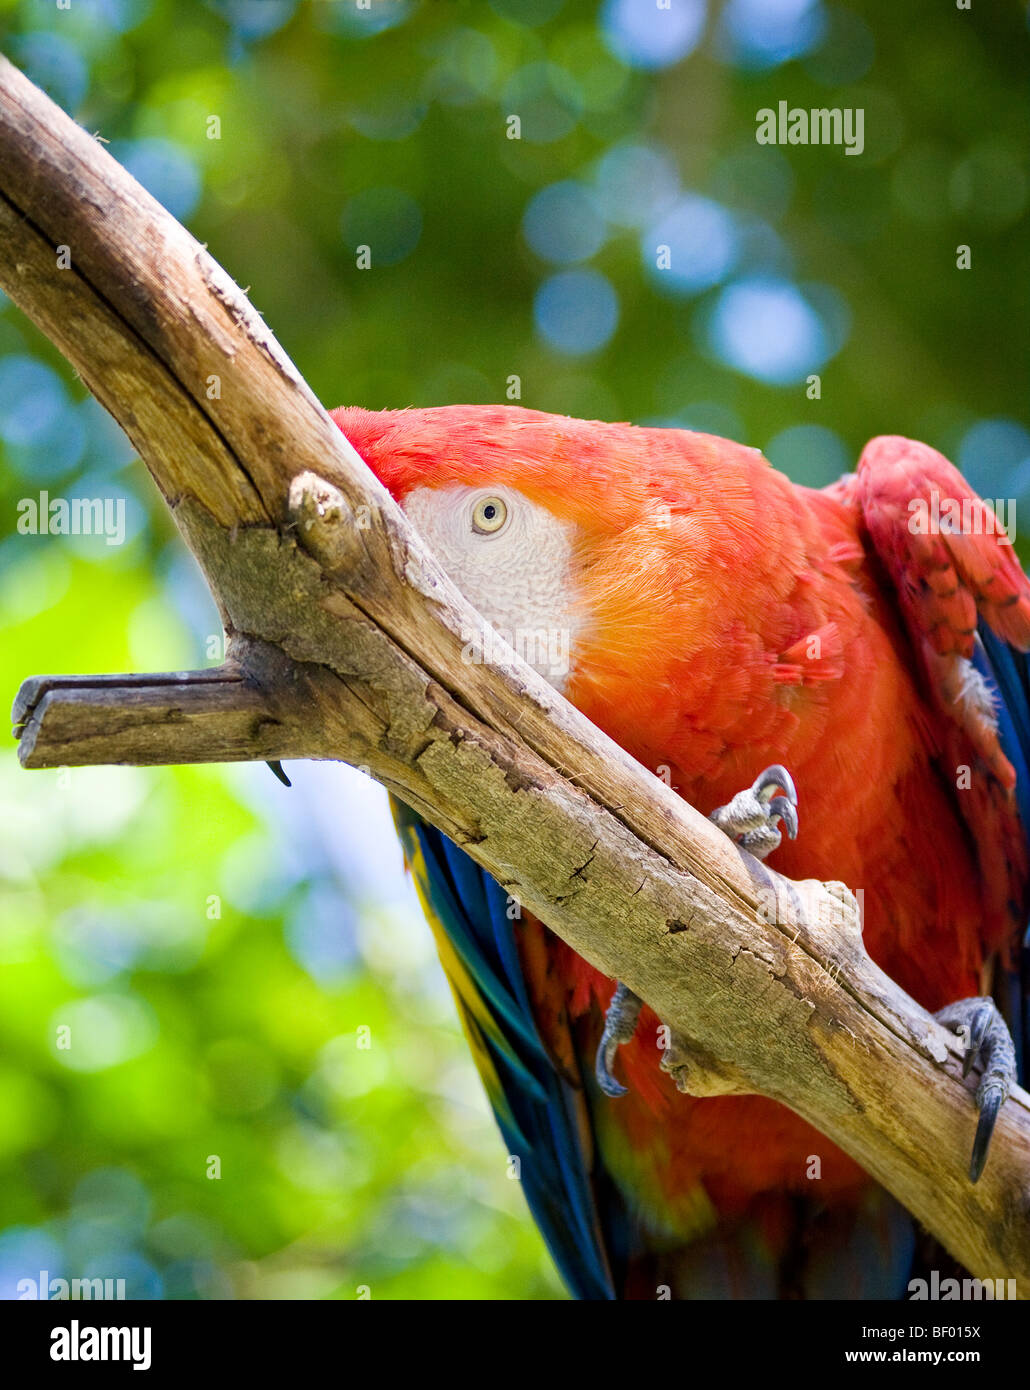 A shy and colorful 'Scarlet Macaw' plays peek-a-boo on a branch at the 'San Diego Zoo' in 'San Diego,' 'California.' Stock Photo